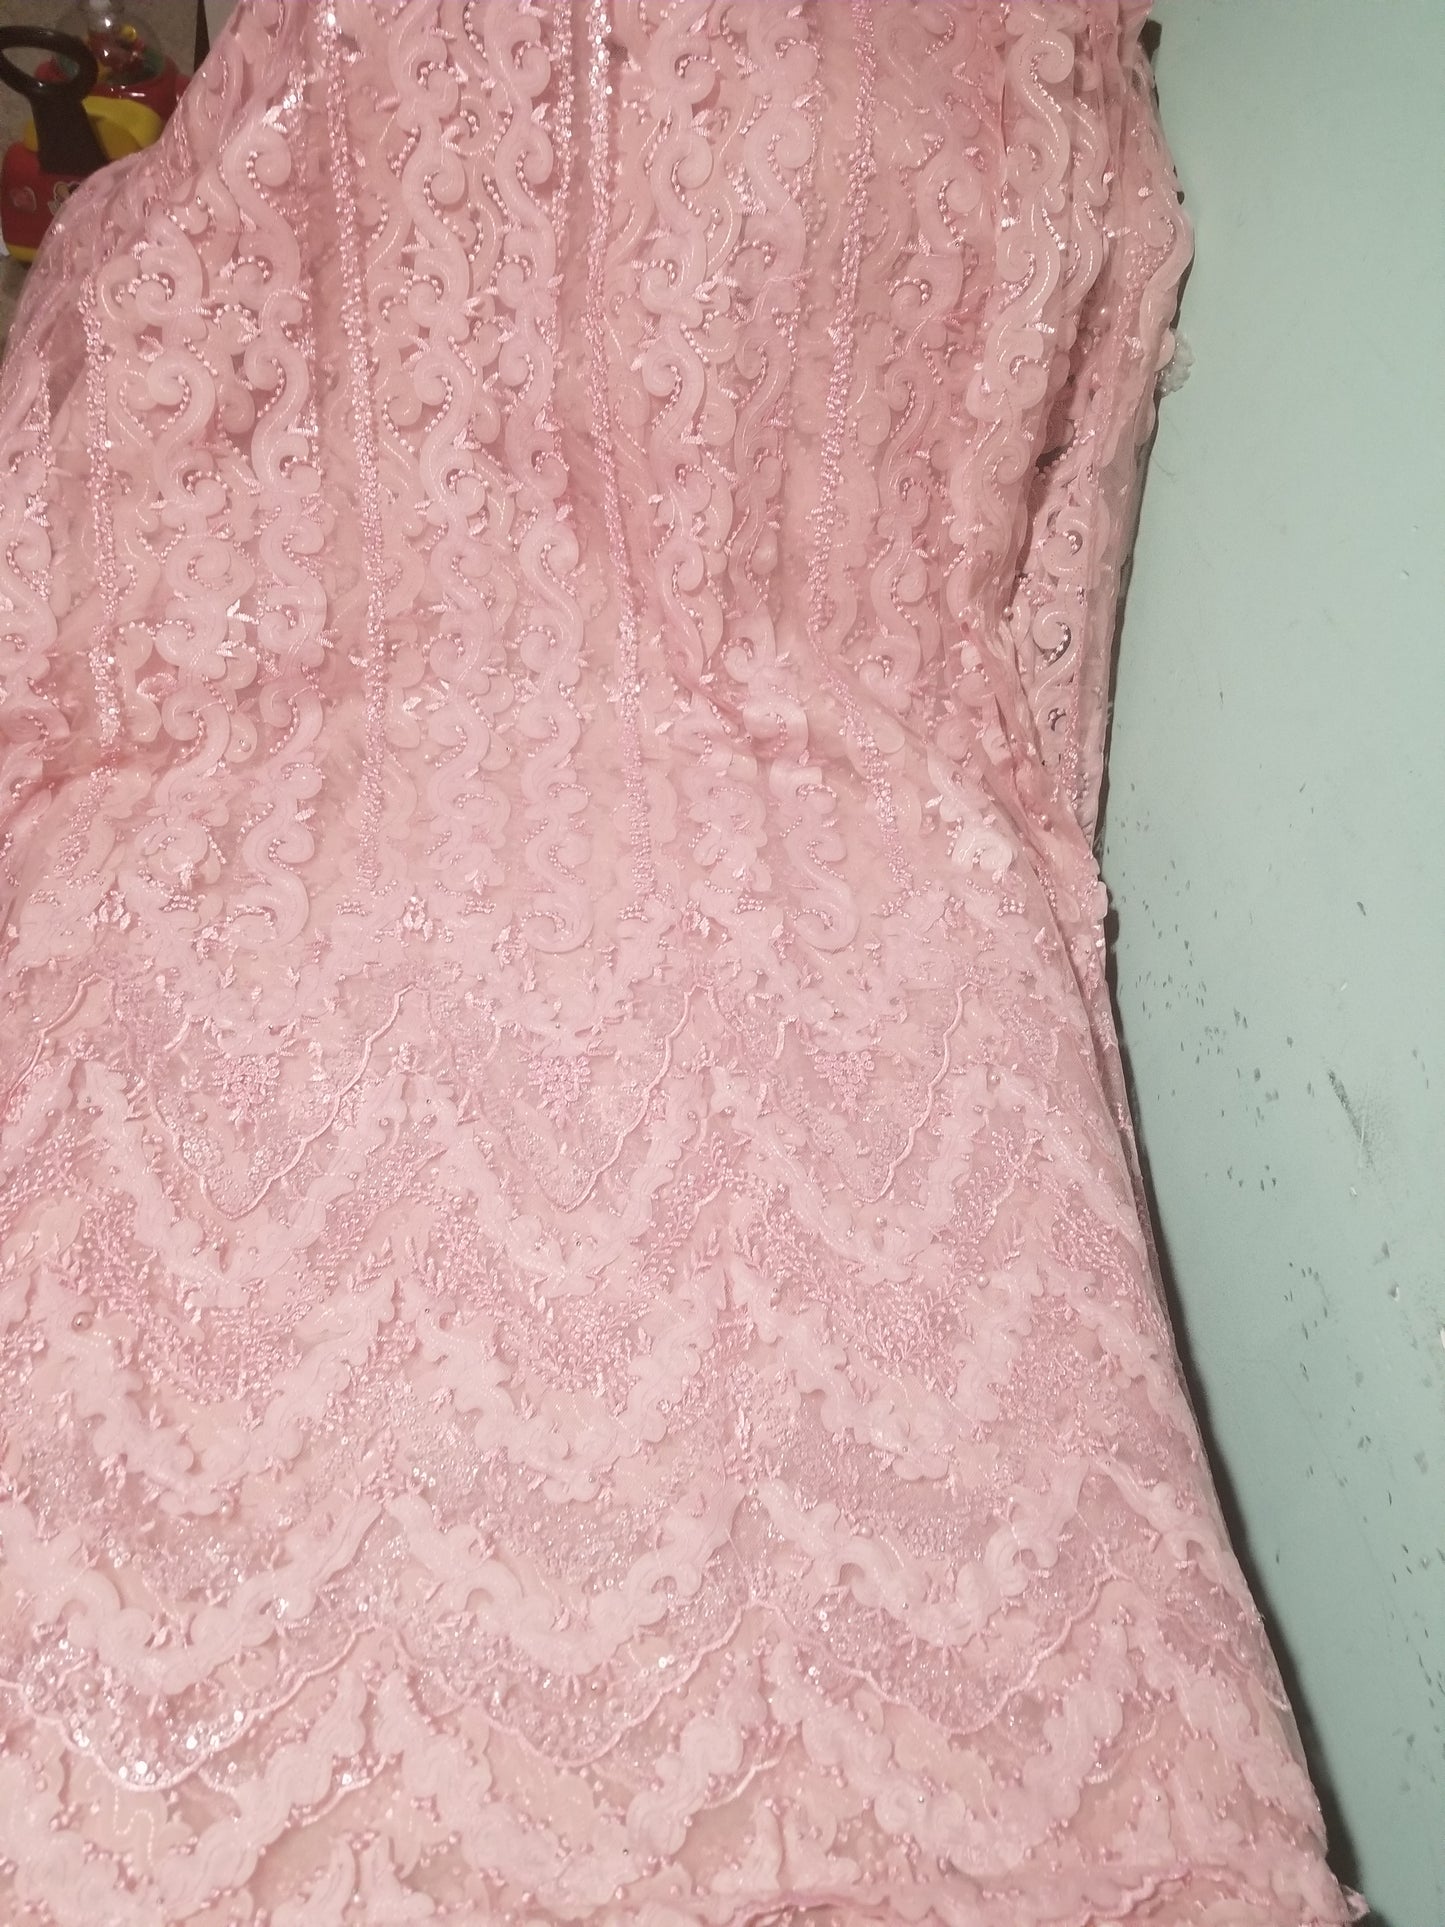 New arrival soft pink net French lace fabric. Quality lace stoned with pearls and sequins. Sold per 5yds. African french lace fabric. Rich quality for wedding dress